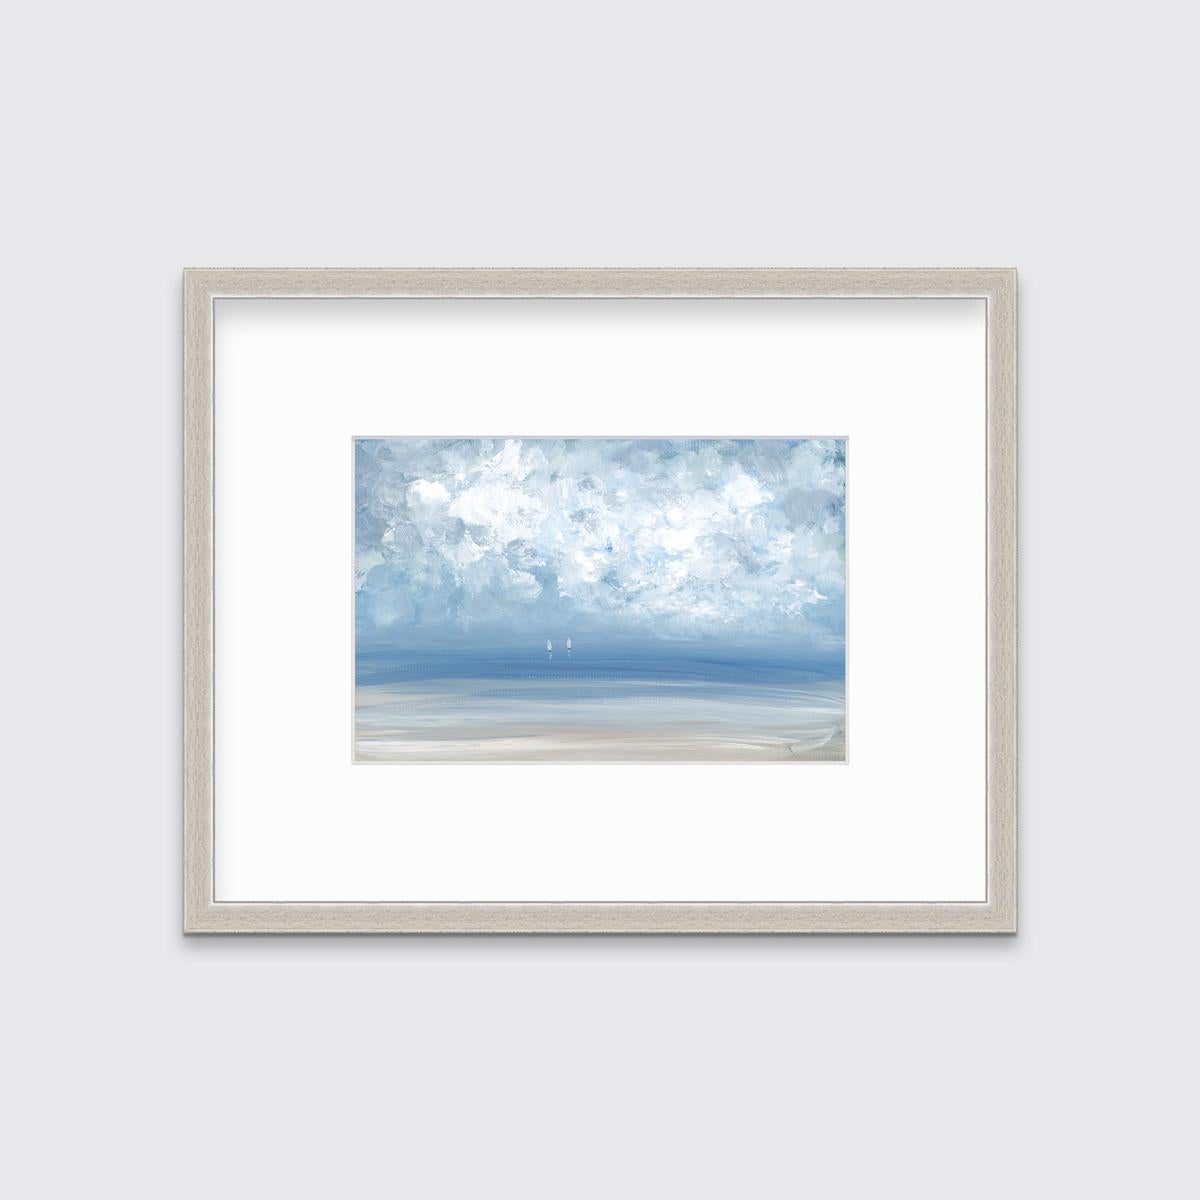 S. Cora Aldo Landscape Print - "High Clouds, " Framed Limited Edition Giclee Print, 12" x 18"